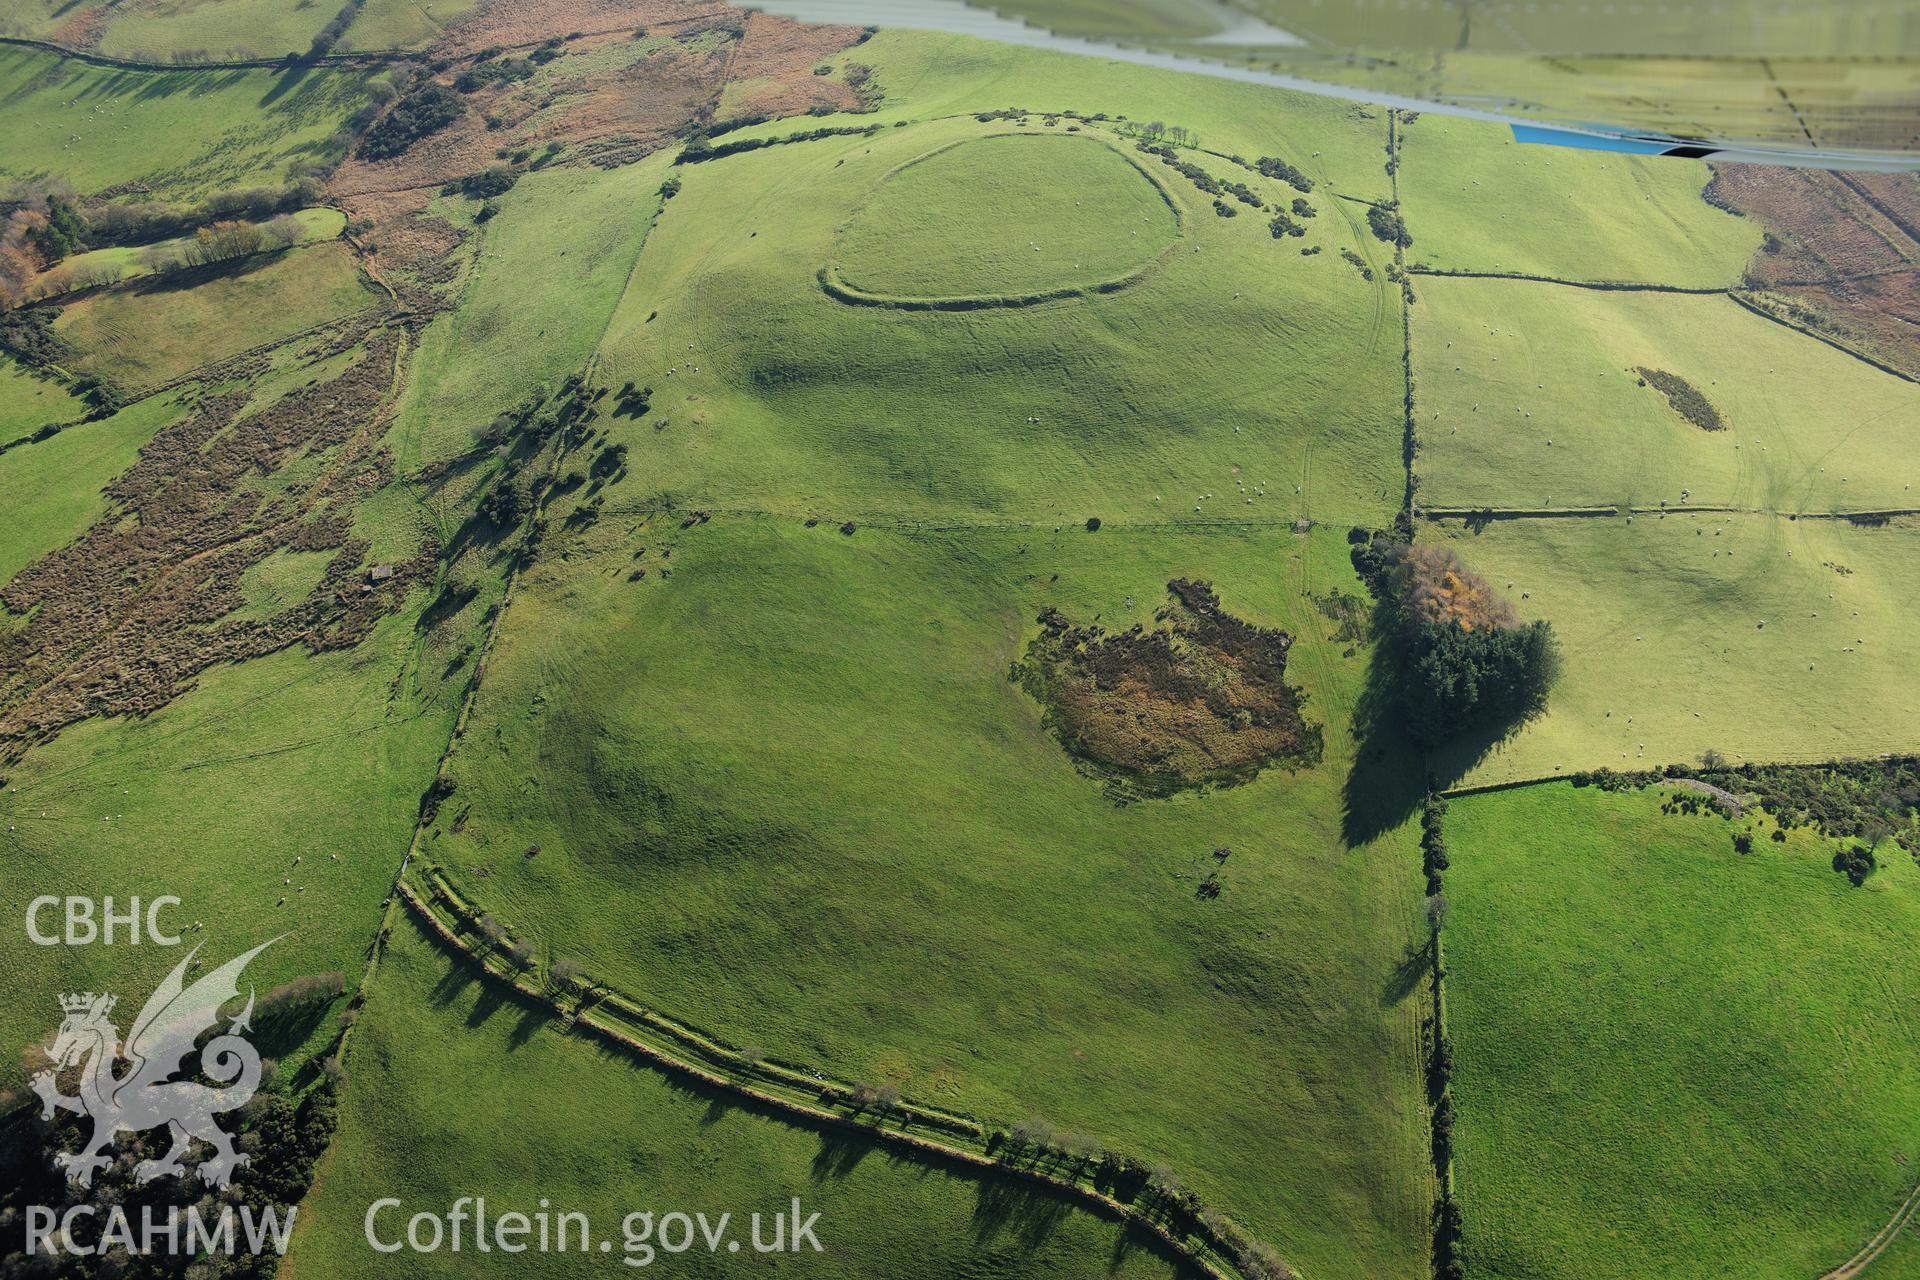 RCAHMW colour oblique photograph of Caer Pencarreg hillfort, landscape view from north-west. Taken by Toby Driver on 05/11/2012.